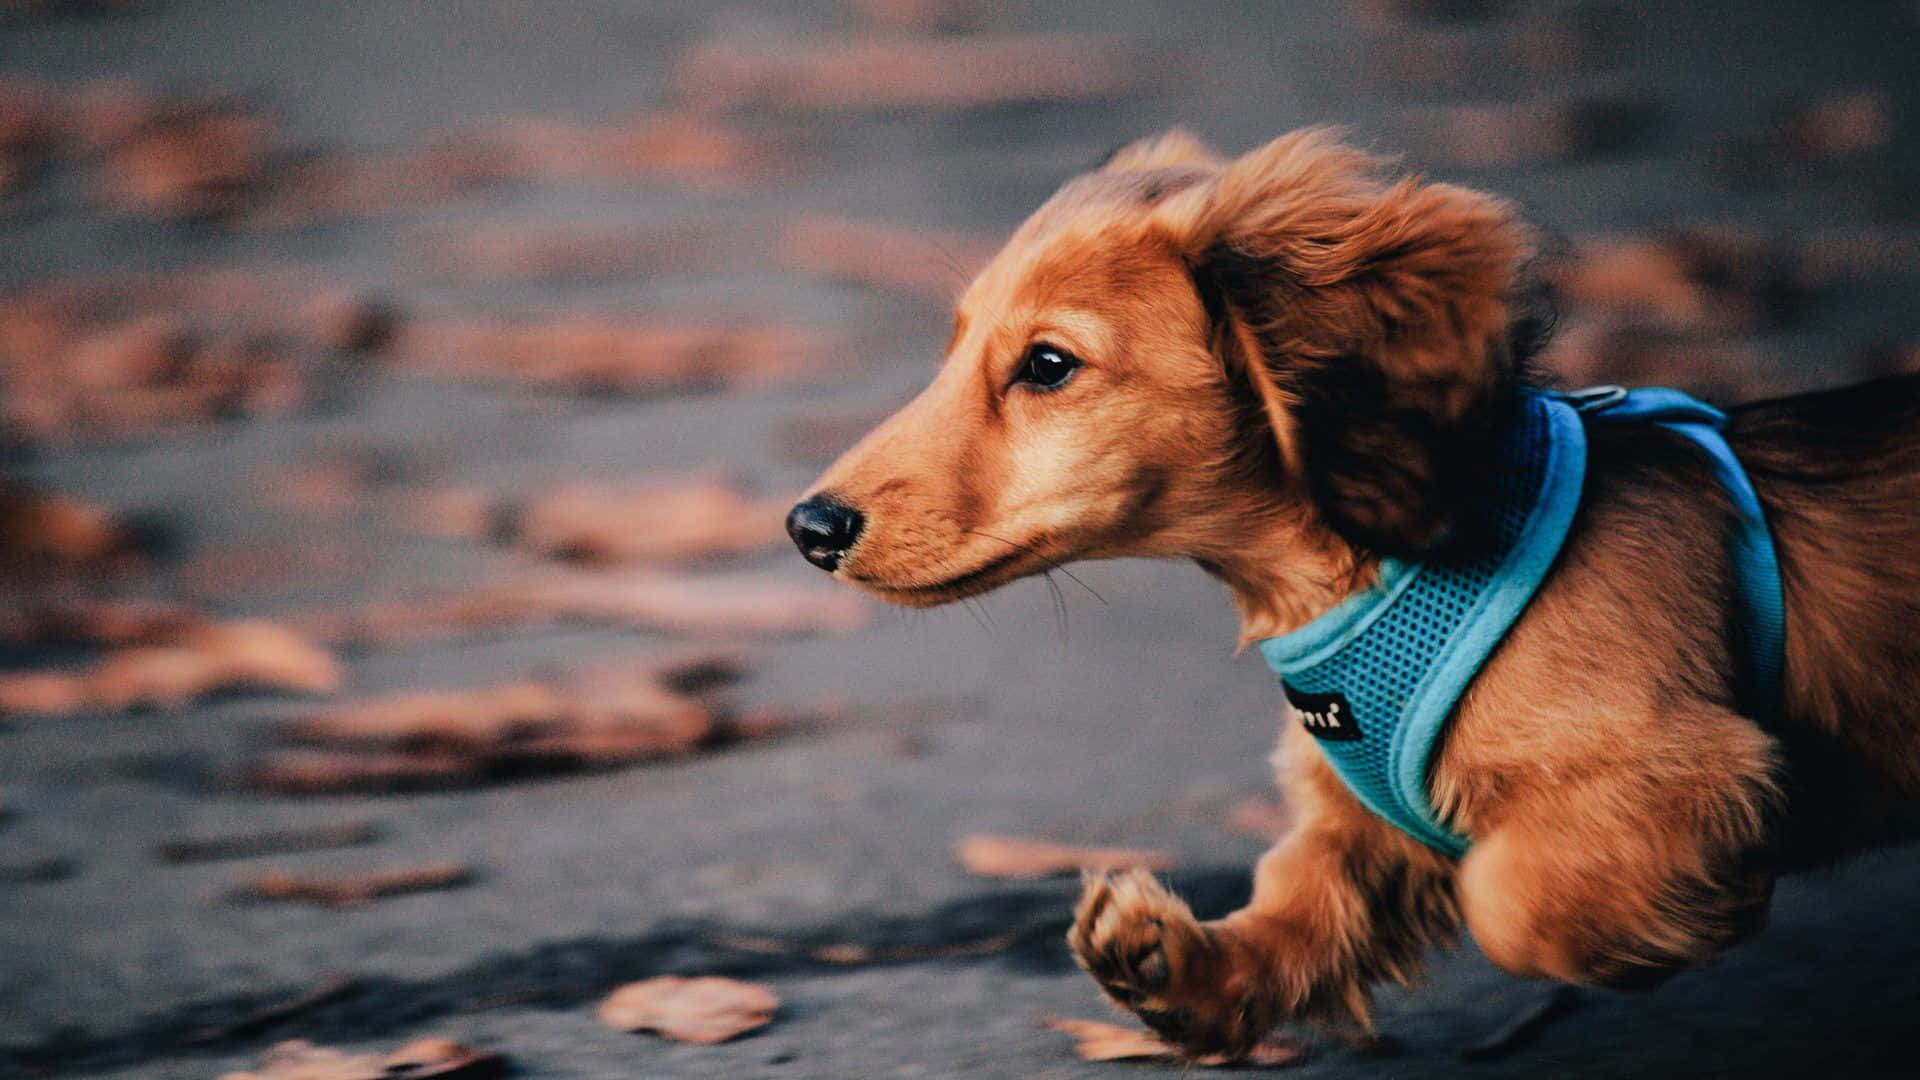 A cute and playful dachshund with a brown, smoochy nose.